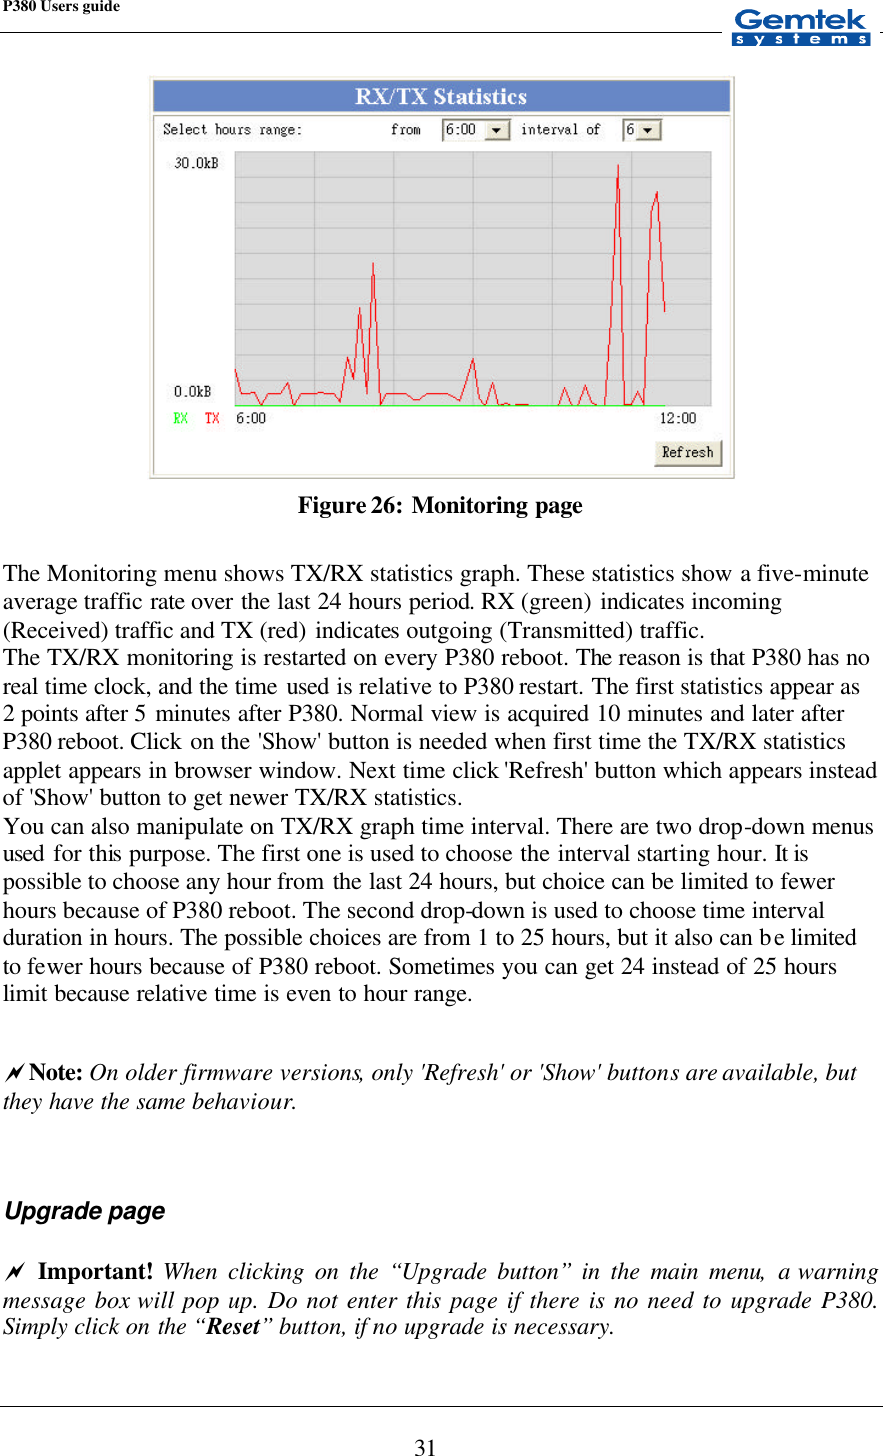 P380 Users guide            31  Figure 26: Monitoring page  The Monitoring menu shows TX/RX statistics graph. These statistics show a five-minute average traffic rate over the last 24 hours period. RX (green) indicates incoming (Received) traffic and TX (red) indicates outgoing (Transmitted) traffic. The TX/RX monitoring is restarted on every P380 reboot. The reason is that P380 has no real time clock, and the time used is relative to P380 restart. The first statistics appear as 2 points after 5 minutes after P380. Normal view is acquired 10 minutes and later after P380 reboot. Click on the &apos;Show&apos; button is needed when first time the TX/RX statistics applet appears in browser window. Next time click &apos;Refresh&apos; button which appears instead of &apos;Show&apos; button to get newer TX/RX statistics. You can also manipulate on TX/RX graph time interval. There are two drop-down menus used for this purpose. The first one is used to choose the interval starting hour. It is possible to choose any hour from the last 24 hours, but choice can be limited to fewer hours because of P380 reboot. The second drop-down is used to choose time interval duration in hours. The possible choices are from 1 to 25 hours, but it also can be limited to fewer hours because of P380 reboot. Sometimes you can get 24 instead of 25 hours limit because relative time is even to hour range.   ~Note: On older firmware versions, only &apos;Refresh&apos; or &apos;Show&apos; buttons are available, but they have the same behaviour.   Upgrade page  ~ Important! When clicking on the “Upgrade button” in the main menu, a warning message box will pop up. Do not enter this page if there is no need to upgrade P380. Simply click on the “Reset” button, if no upgrade is necessary.   